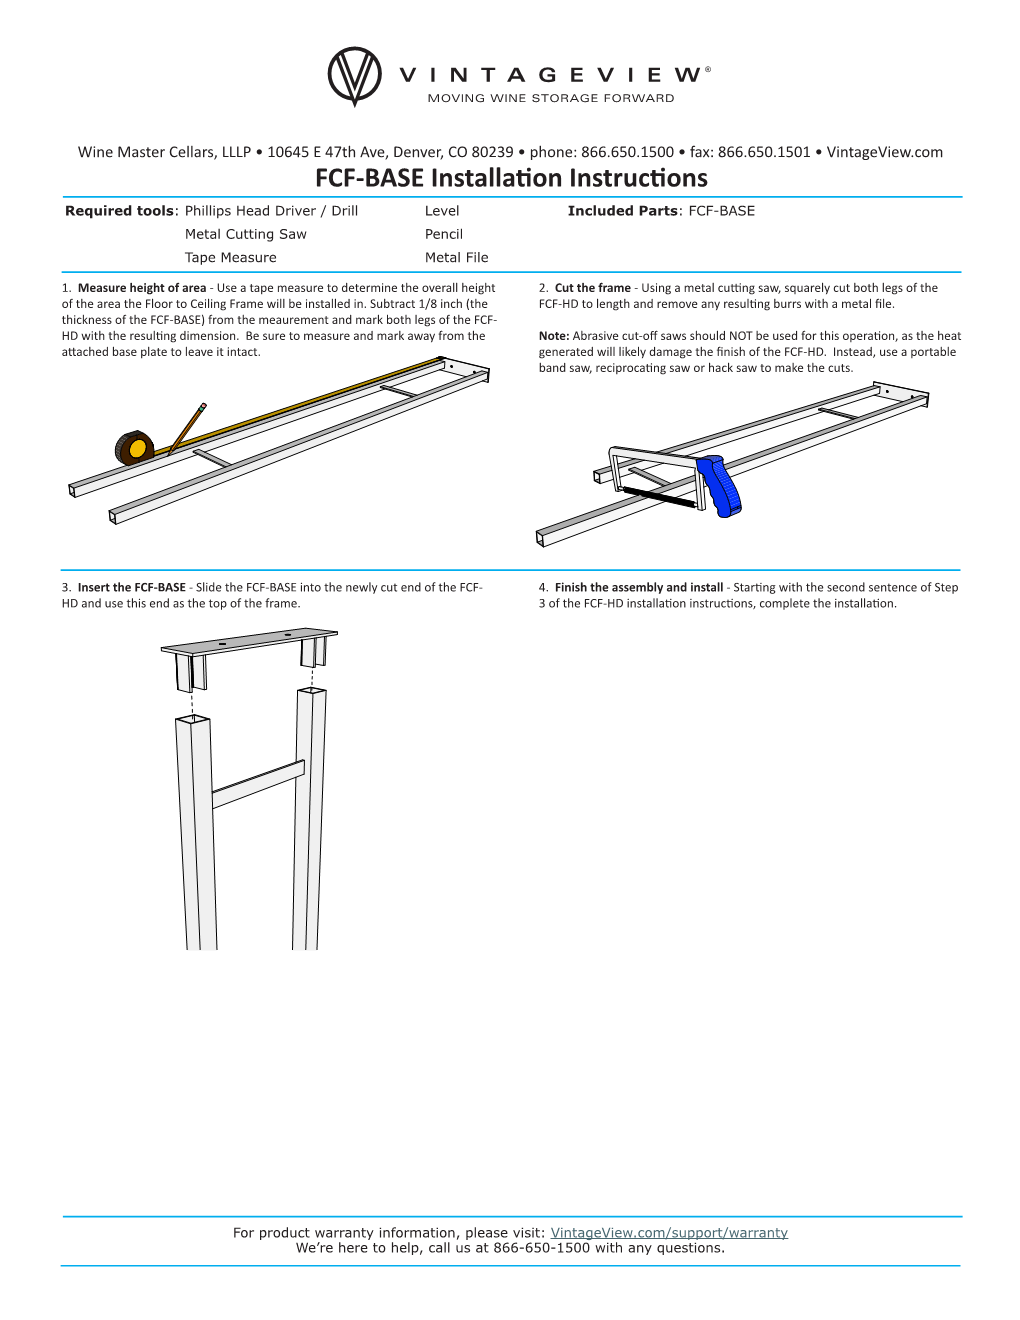 FCF-BASE Installation Instructions Required Tools: Phillips Head Driver / Drill Level Included Parts: FCF-BASE Metal Cutting Saw Pencil Tape Measure Metal File